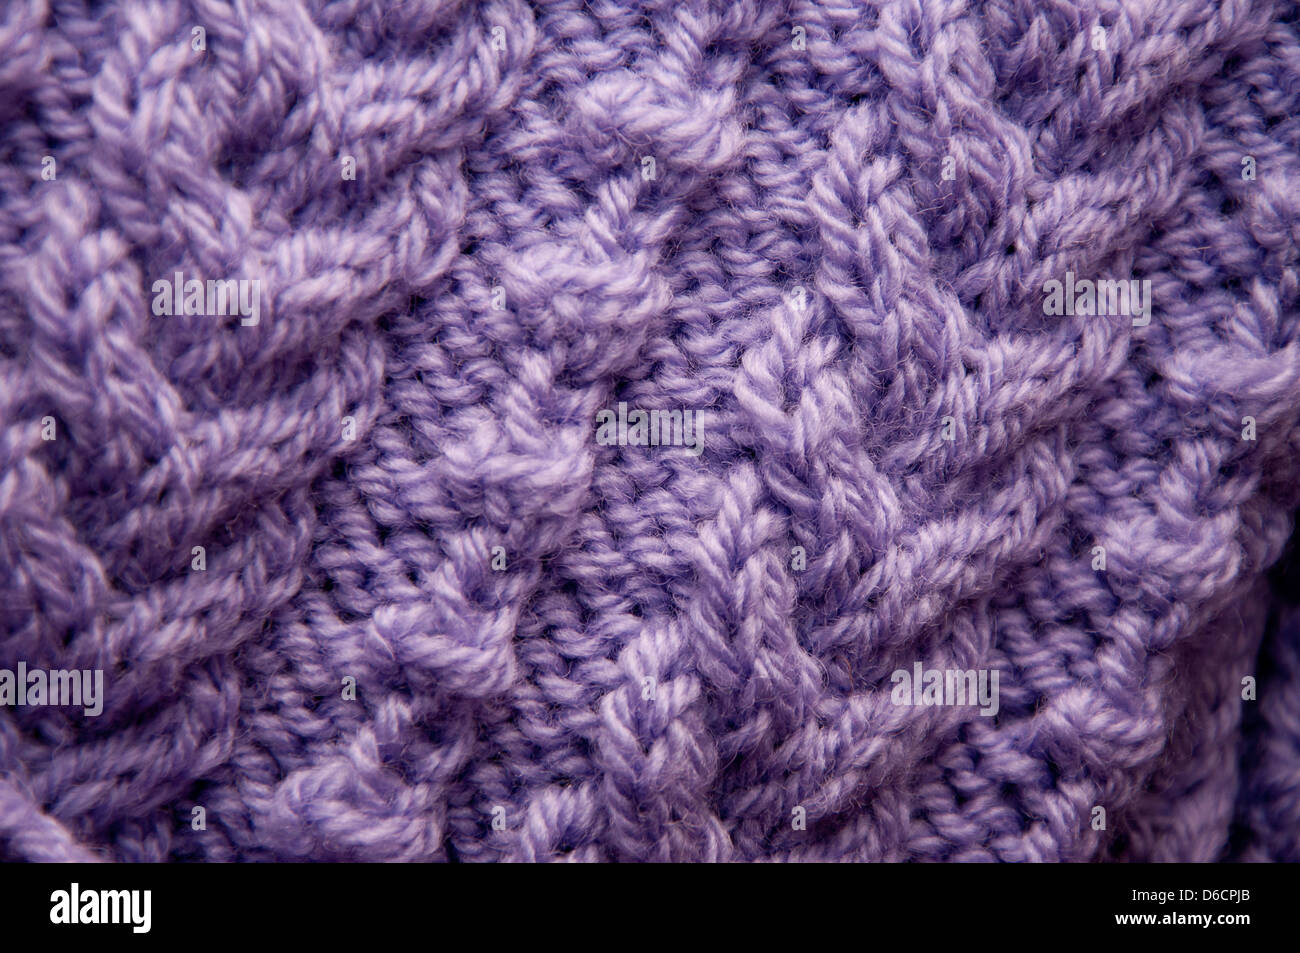 wool knitted garment in close up, texture, detail, abstract, side lit, handicrafts, past times, hobbies Stock Photo